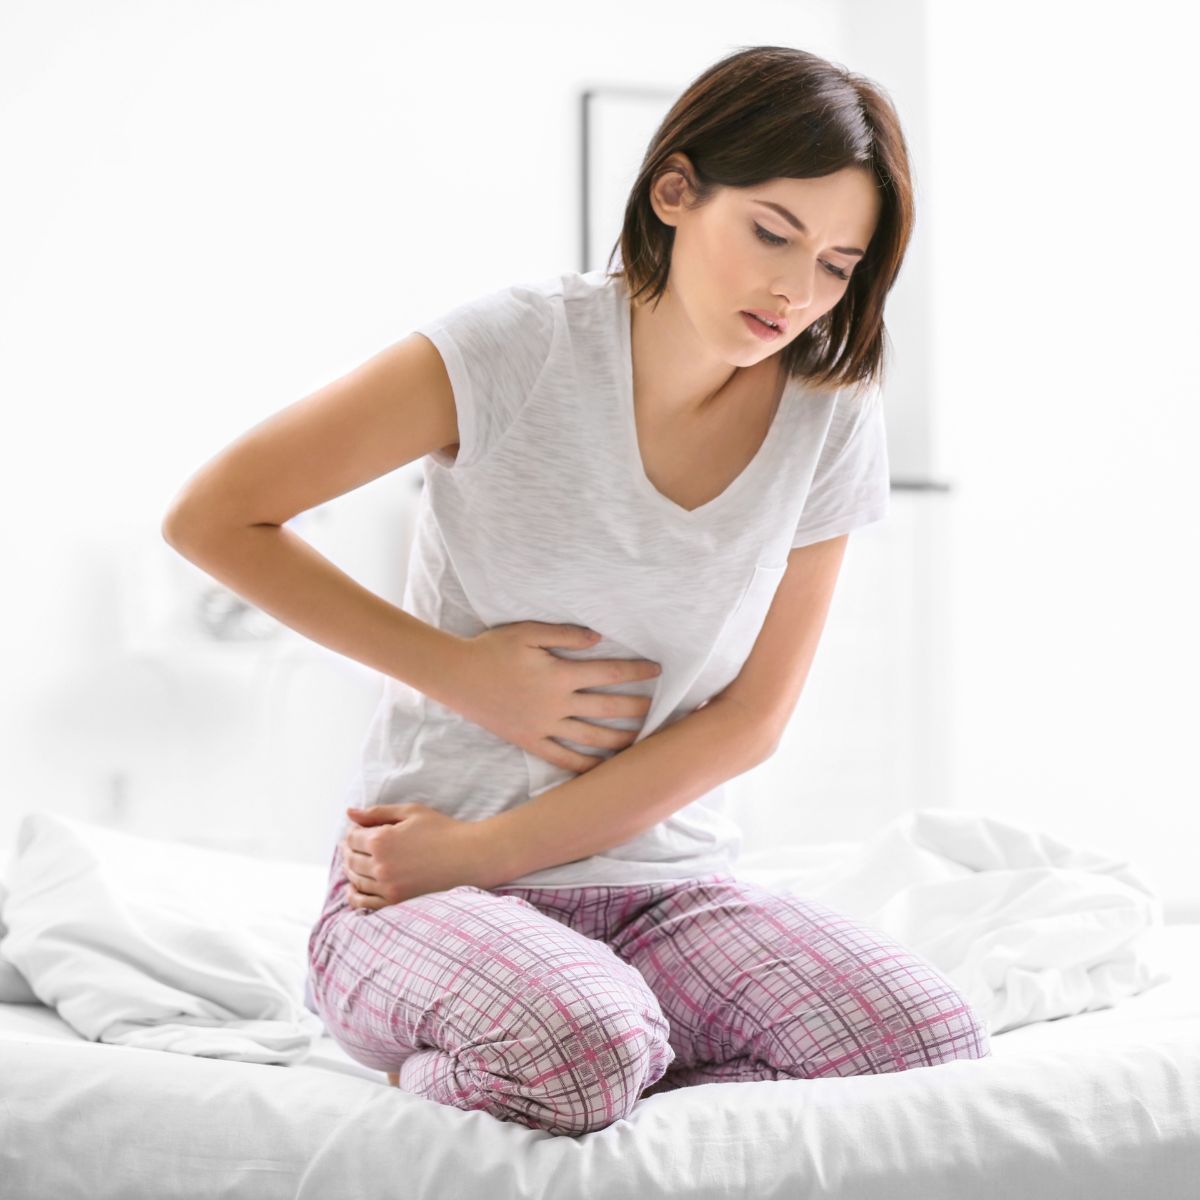 urinary tract infection emotional causes